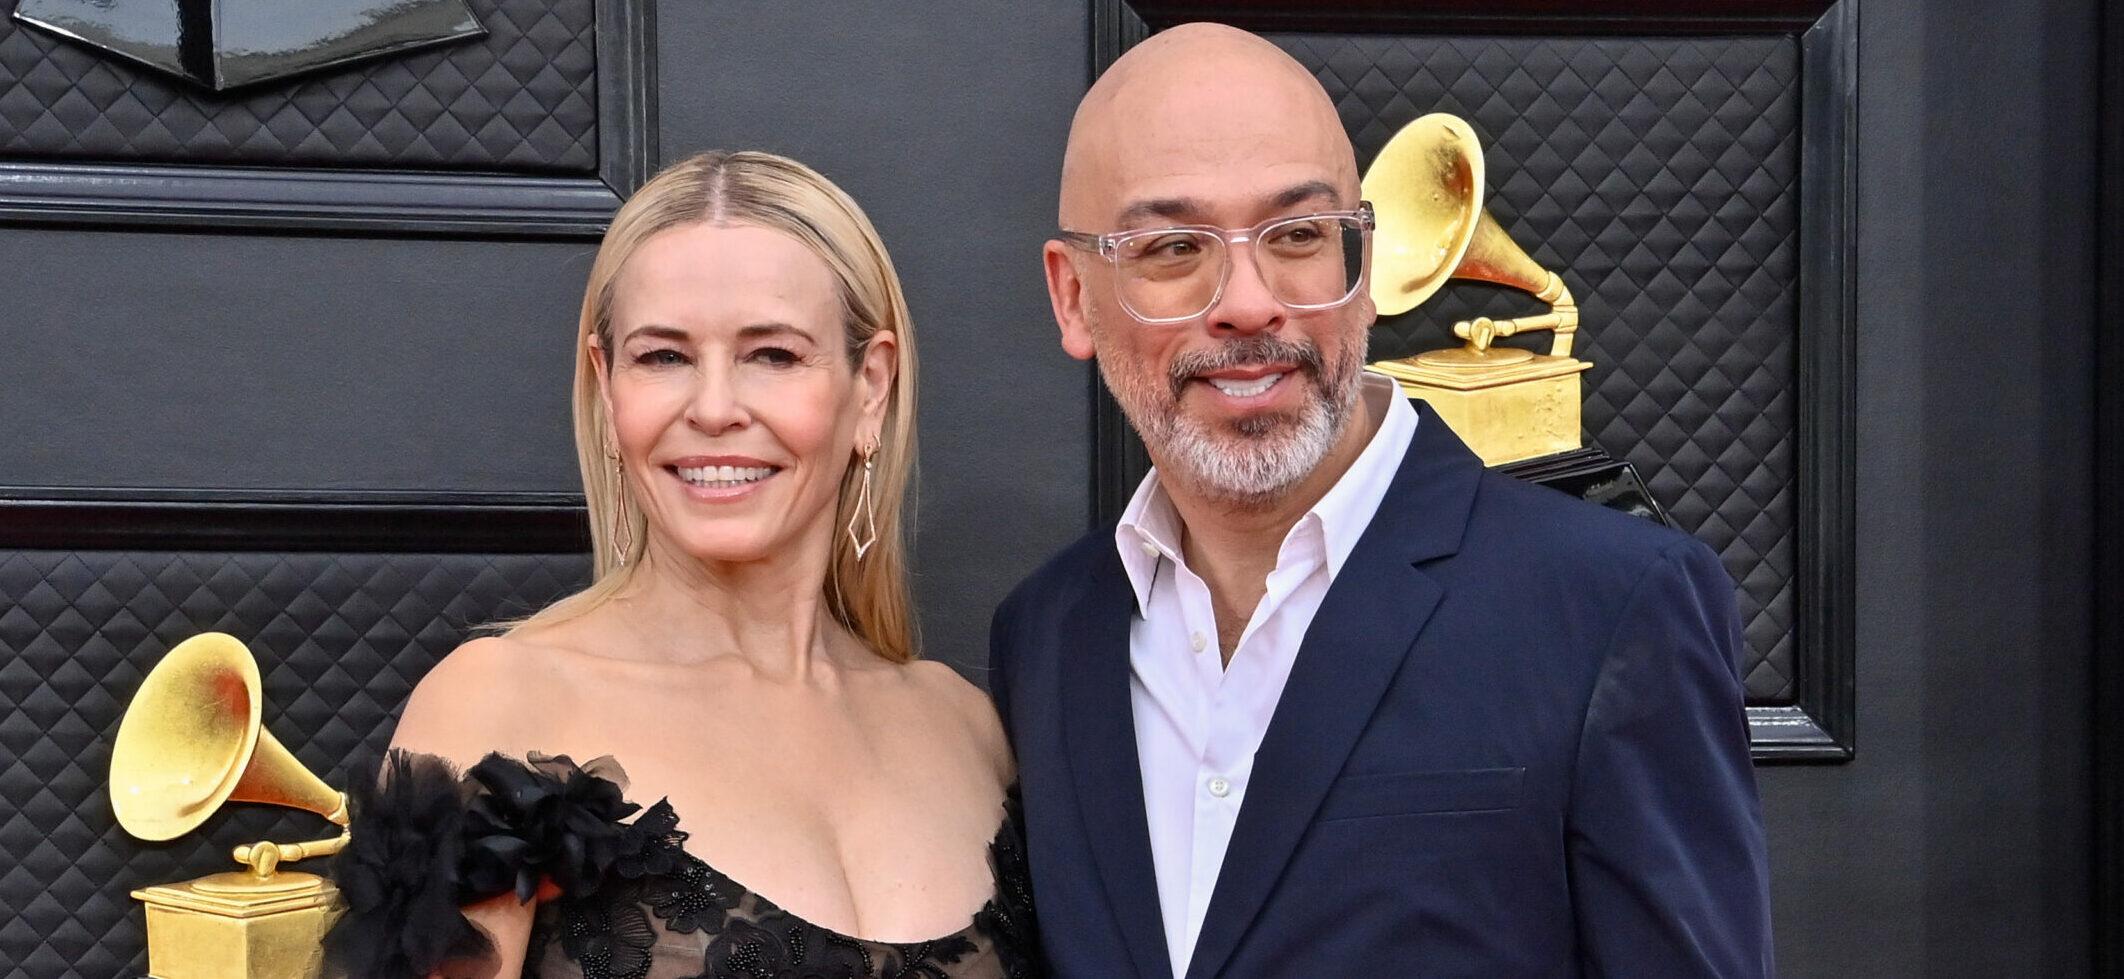 Jo Koy Speaks Fondly Of Chelsea Handler 1 Year After Their Split: ‘She’s A Beautiful Person’